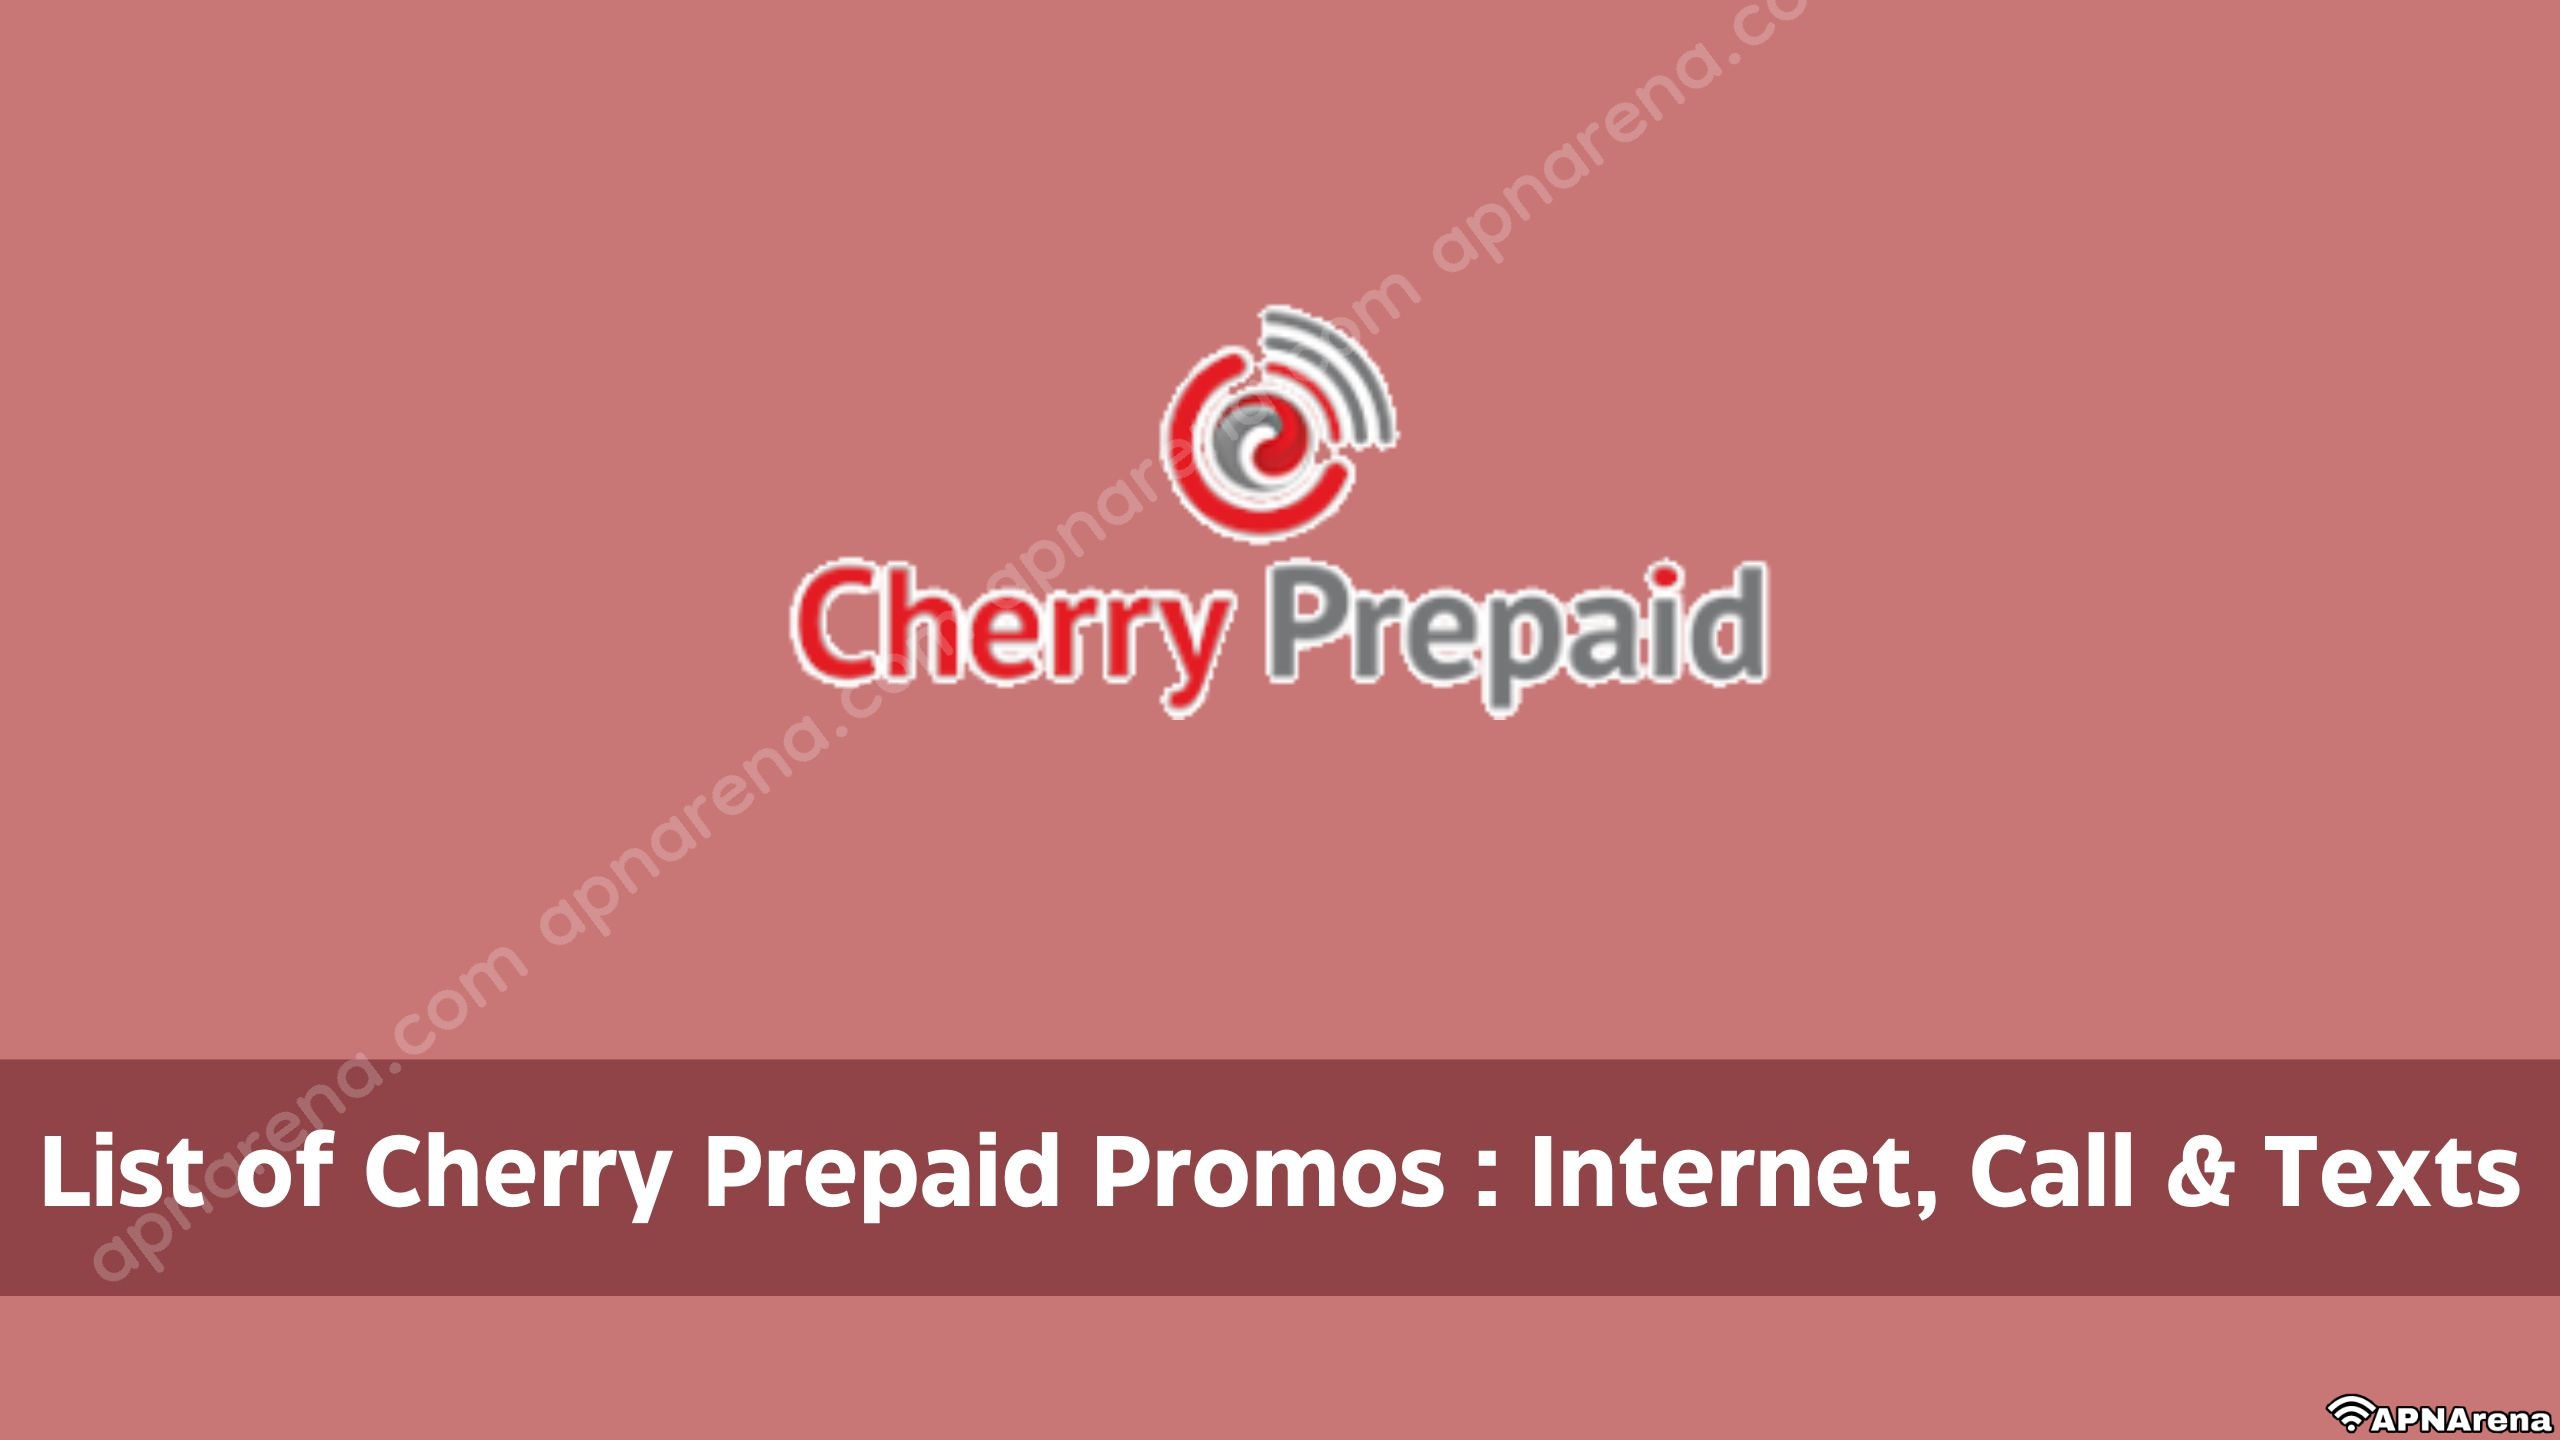 List of Cherry Prepaid Promos including Internet Data, Unlimited Call & Text and Combo Plans